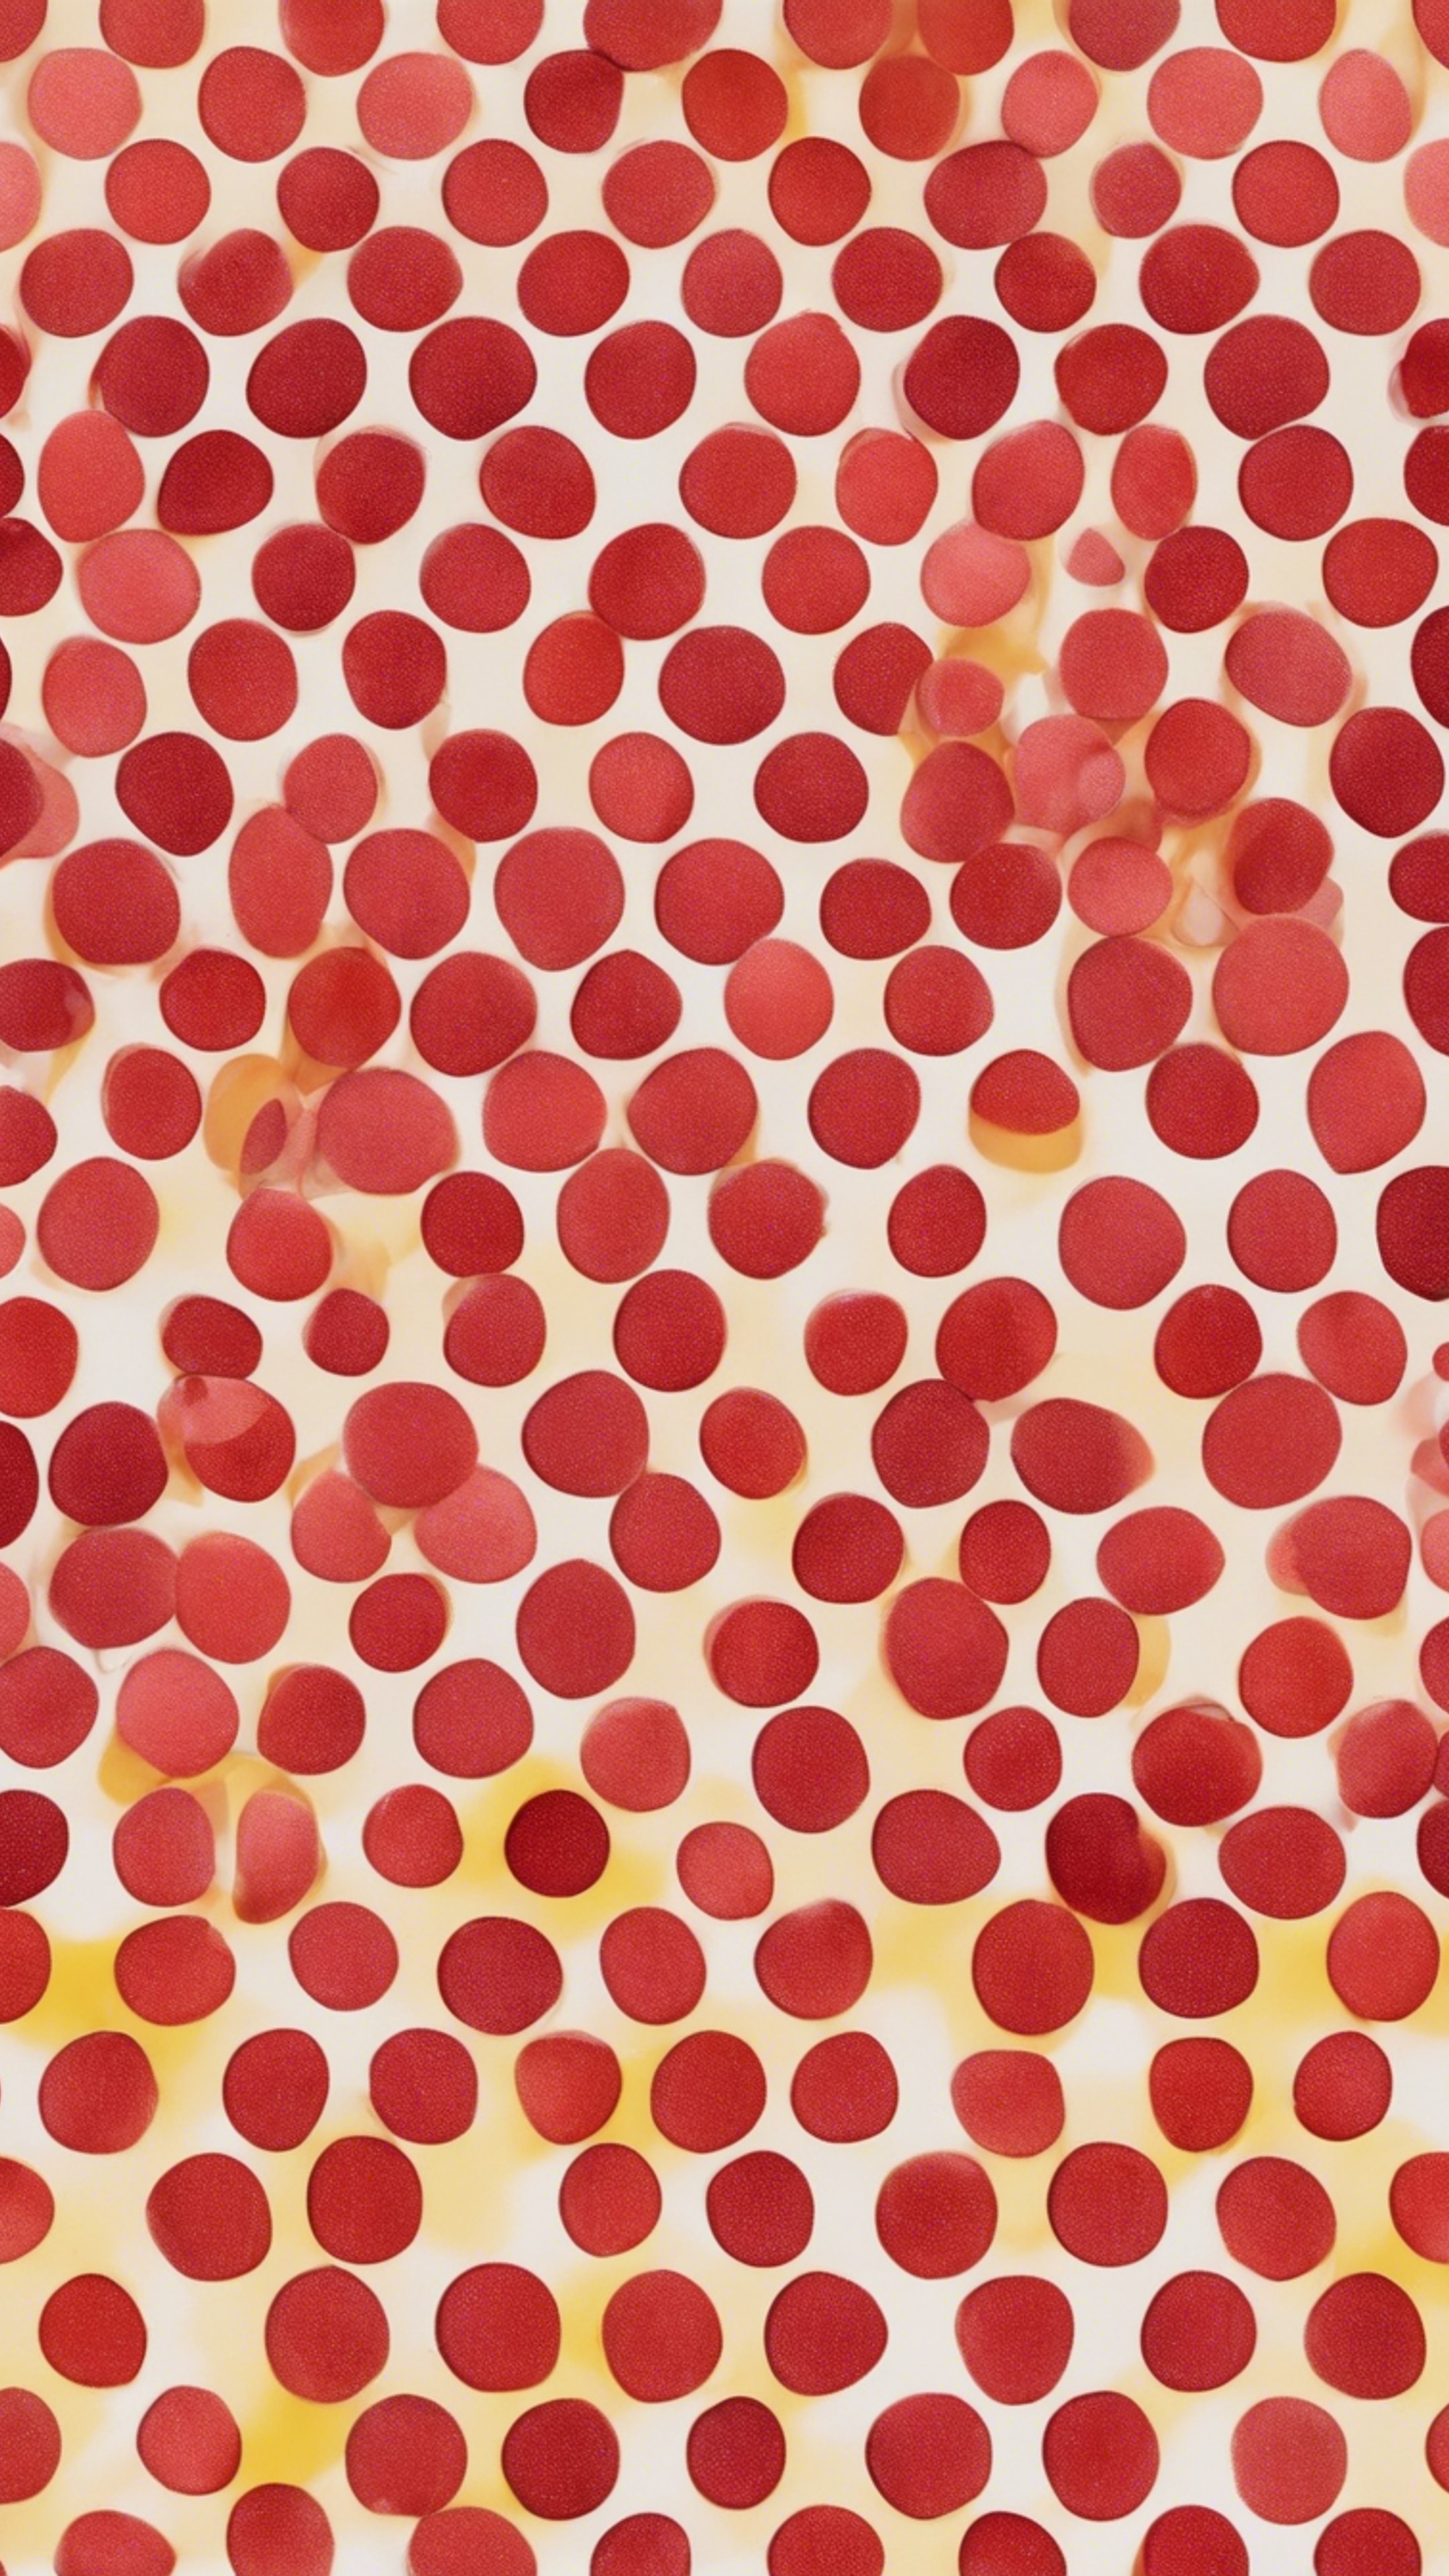 Red polka dots clashing beautifully with yellow ones, all over the seamless canvas. Обои[6845ea3f5aaf42daa07d]